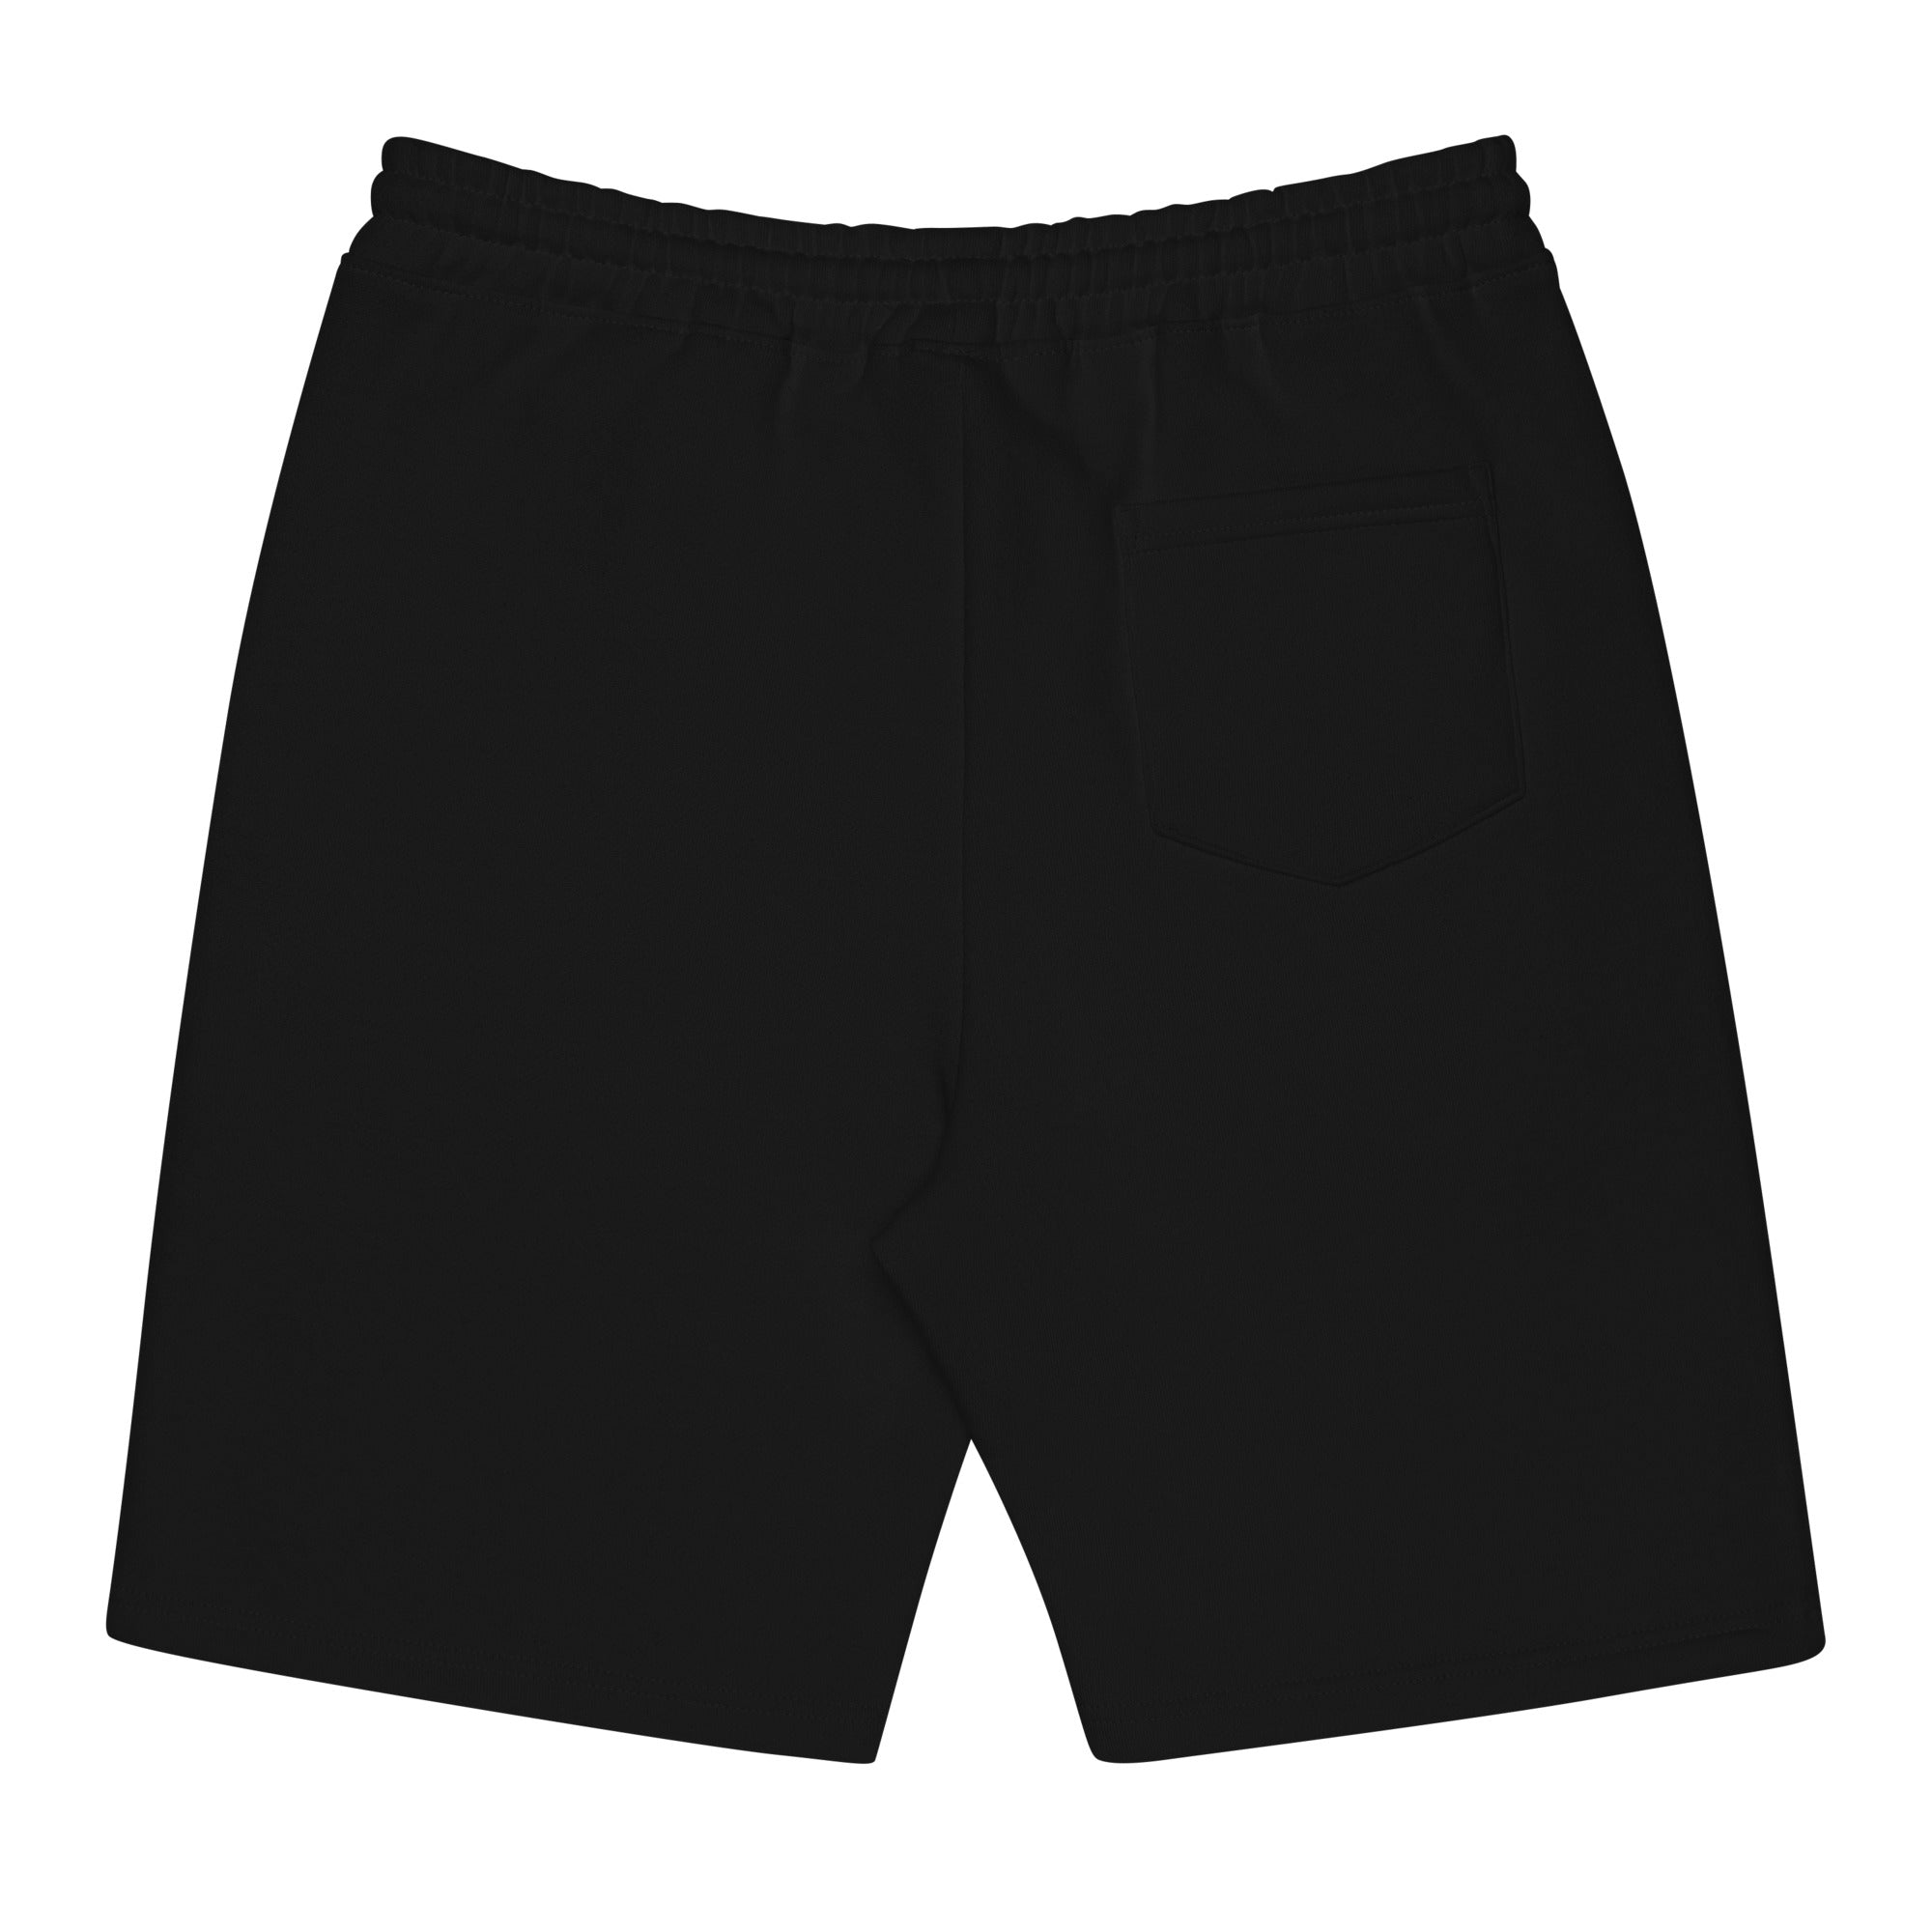 LIMITED "Hoop" shorts